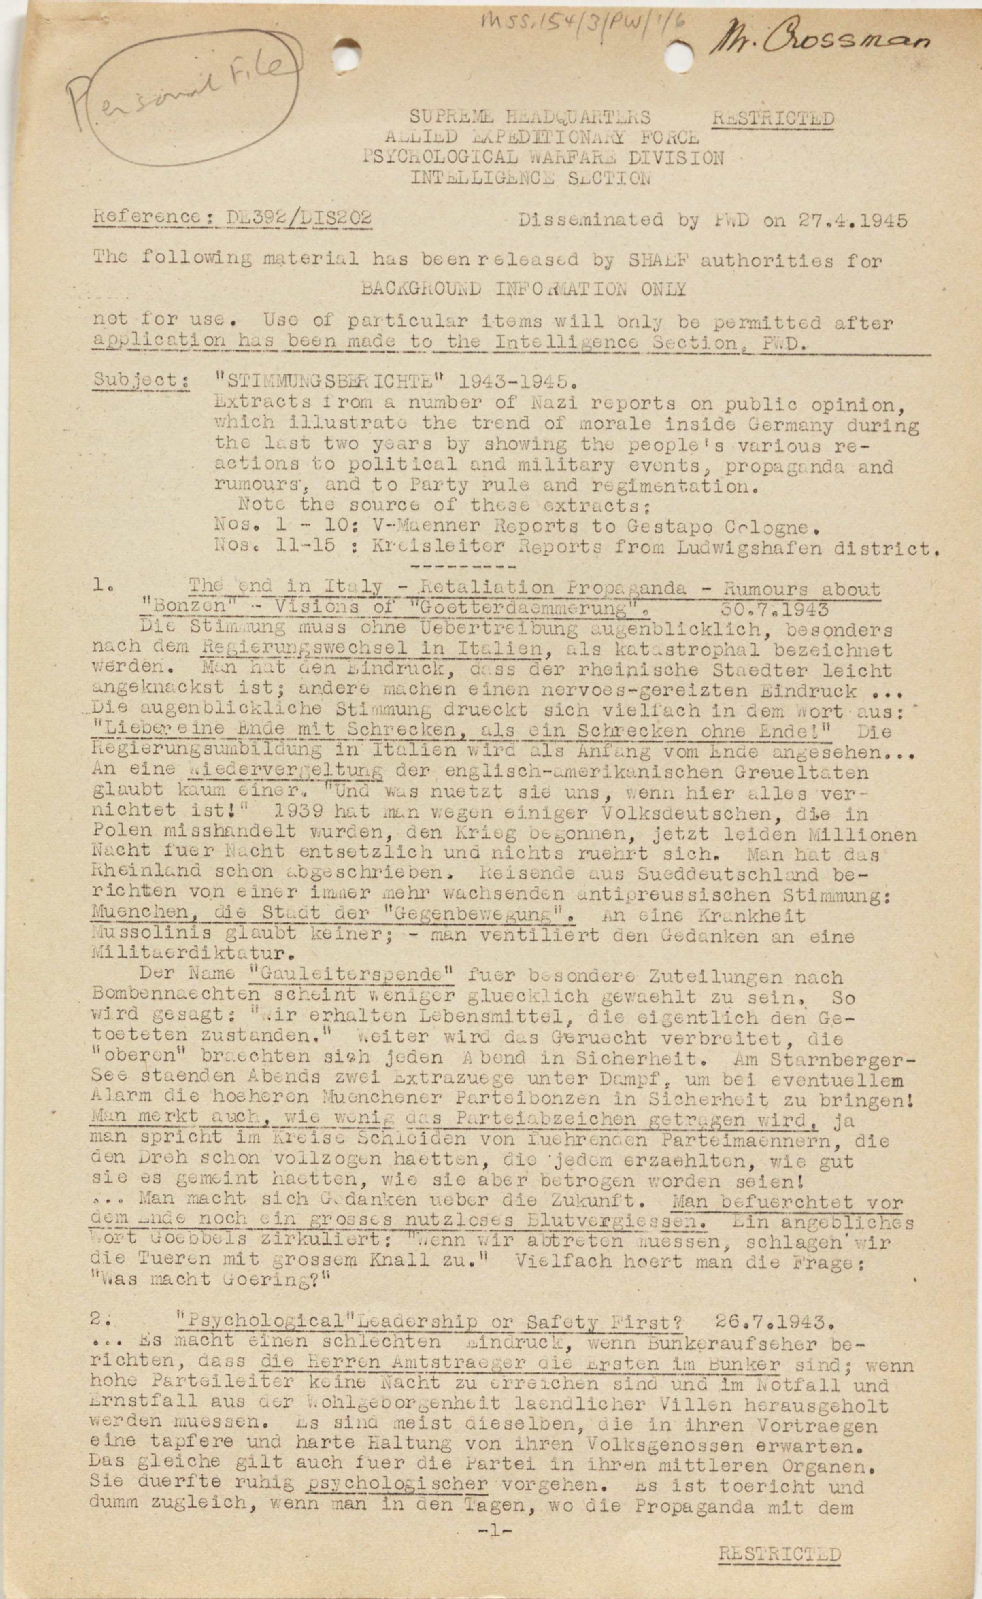 Extracts from Nazi reports on public opinion, 1943-1945